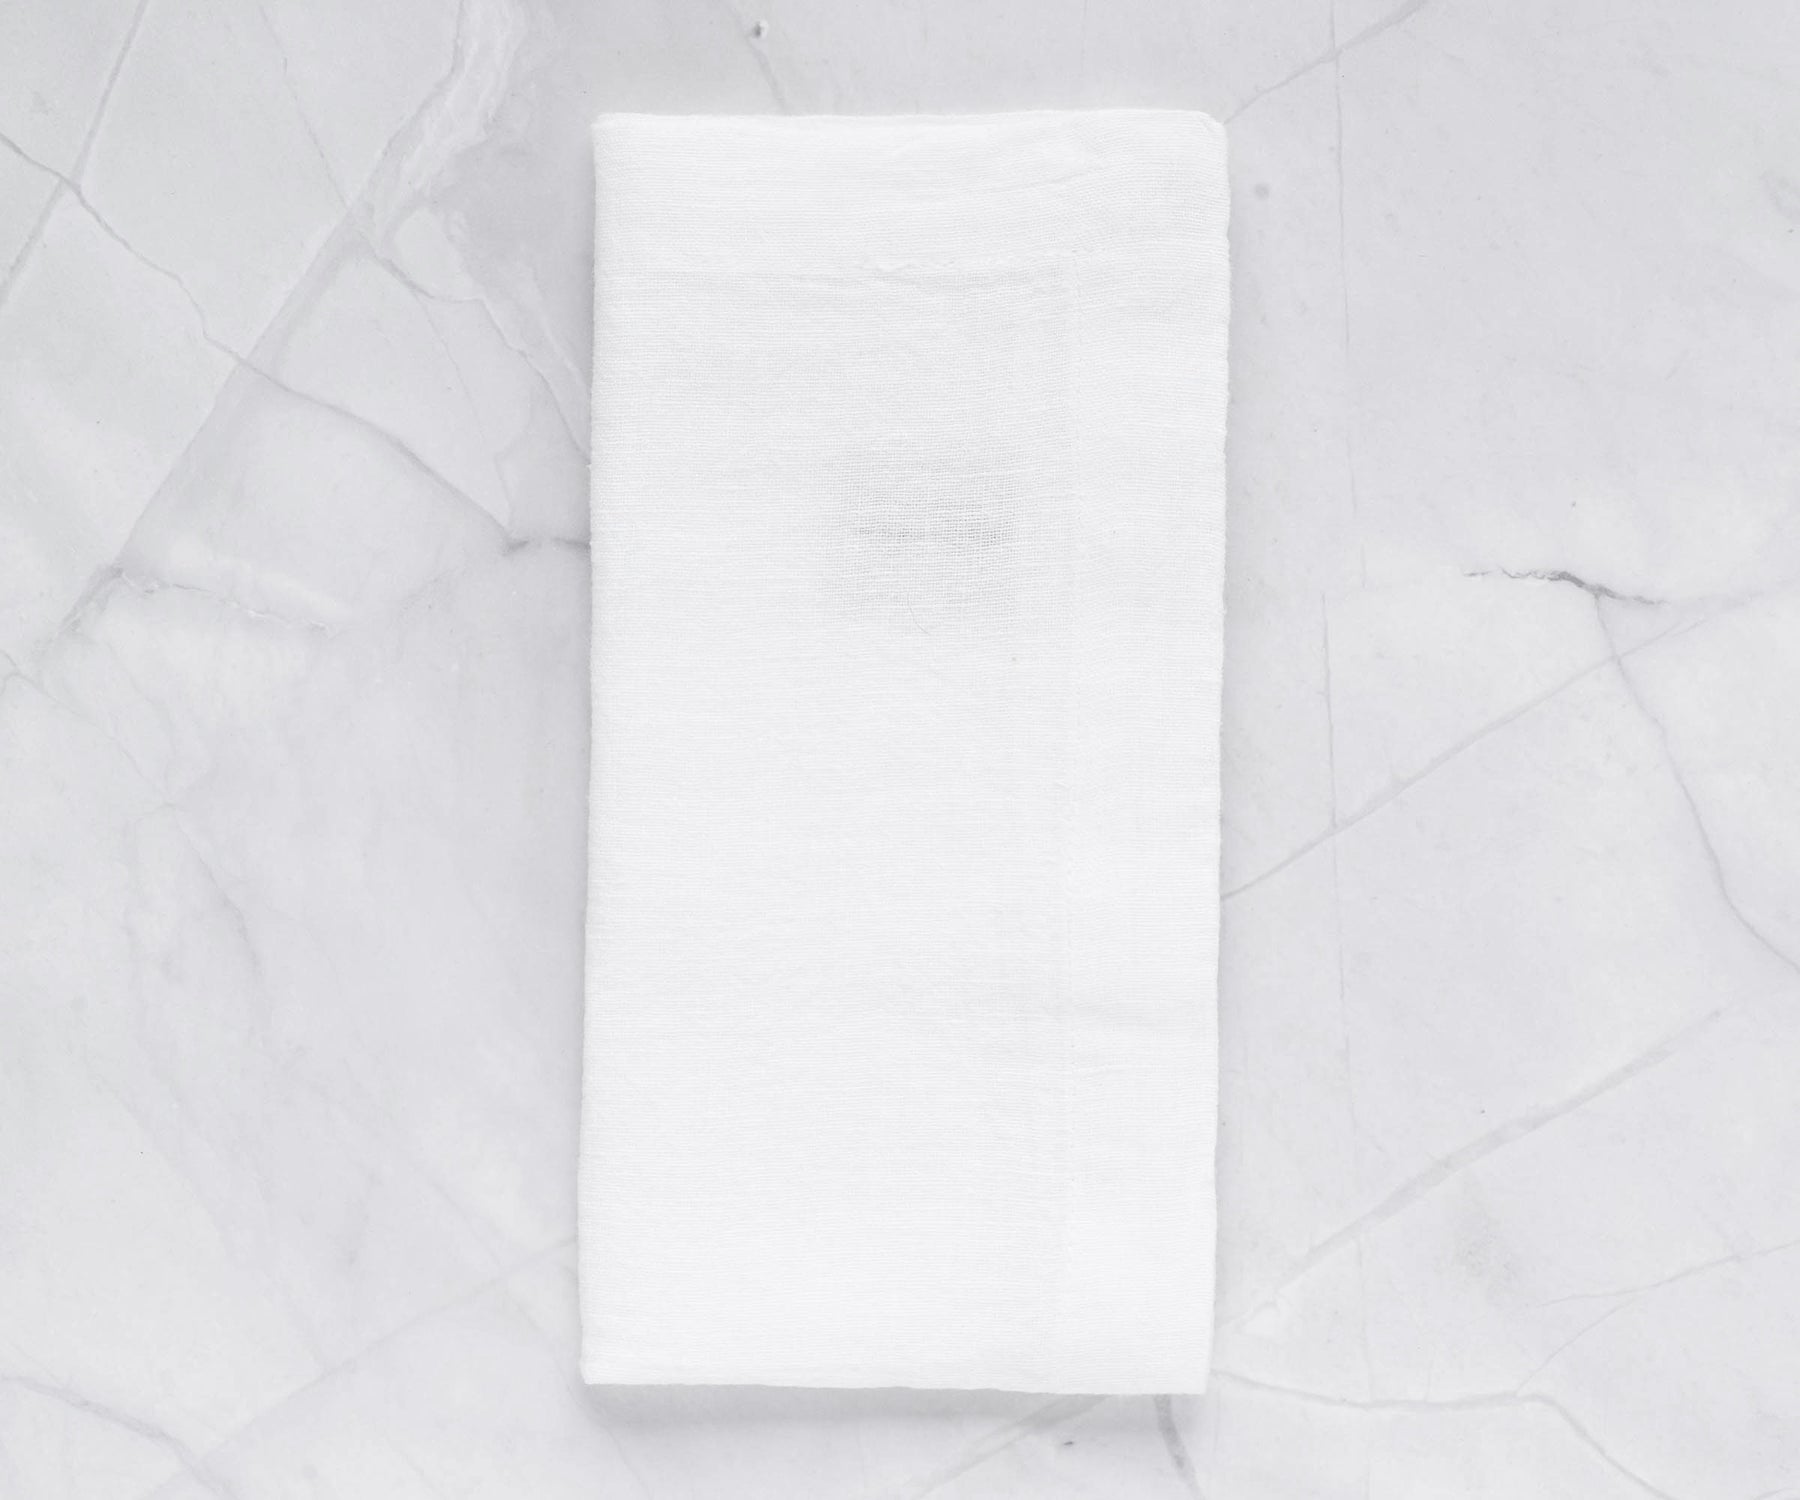 Linen is a natural, biodegradable material, making linen napkins an eco-friendly choice compared to disposable paper napkins. Using linen napkins can help reduce waste and environmental impact.